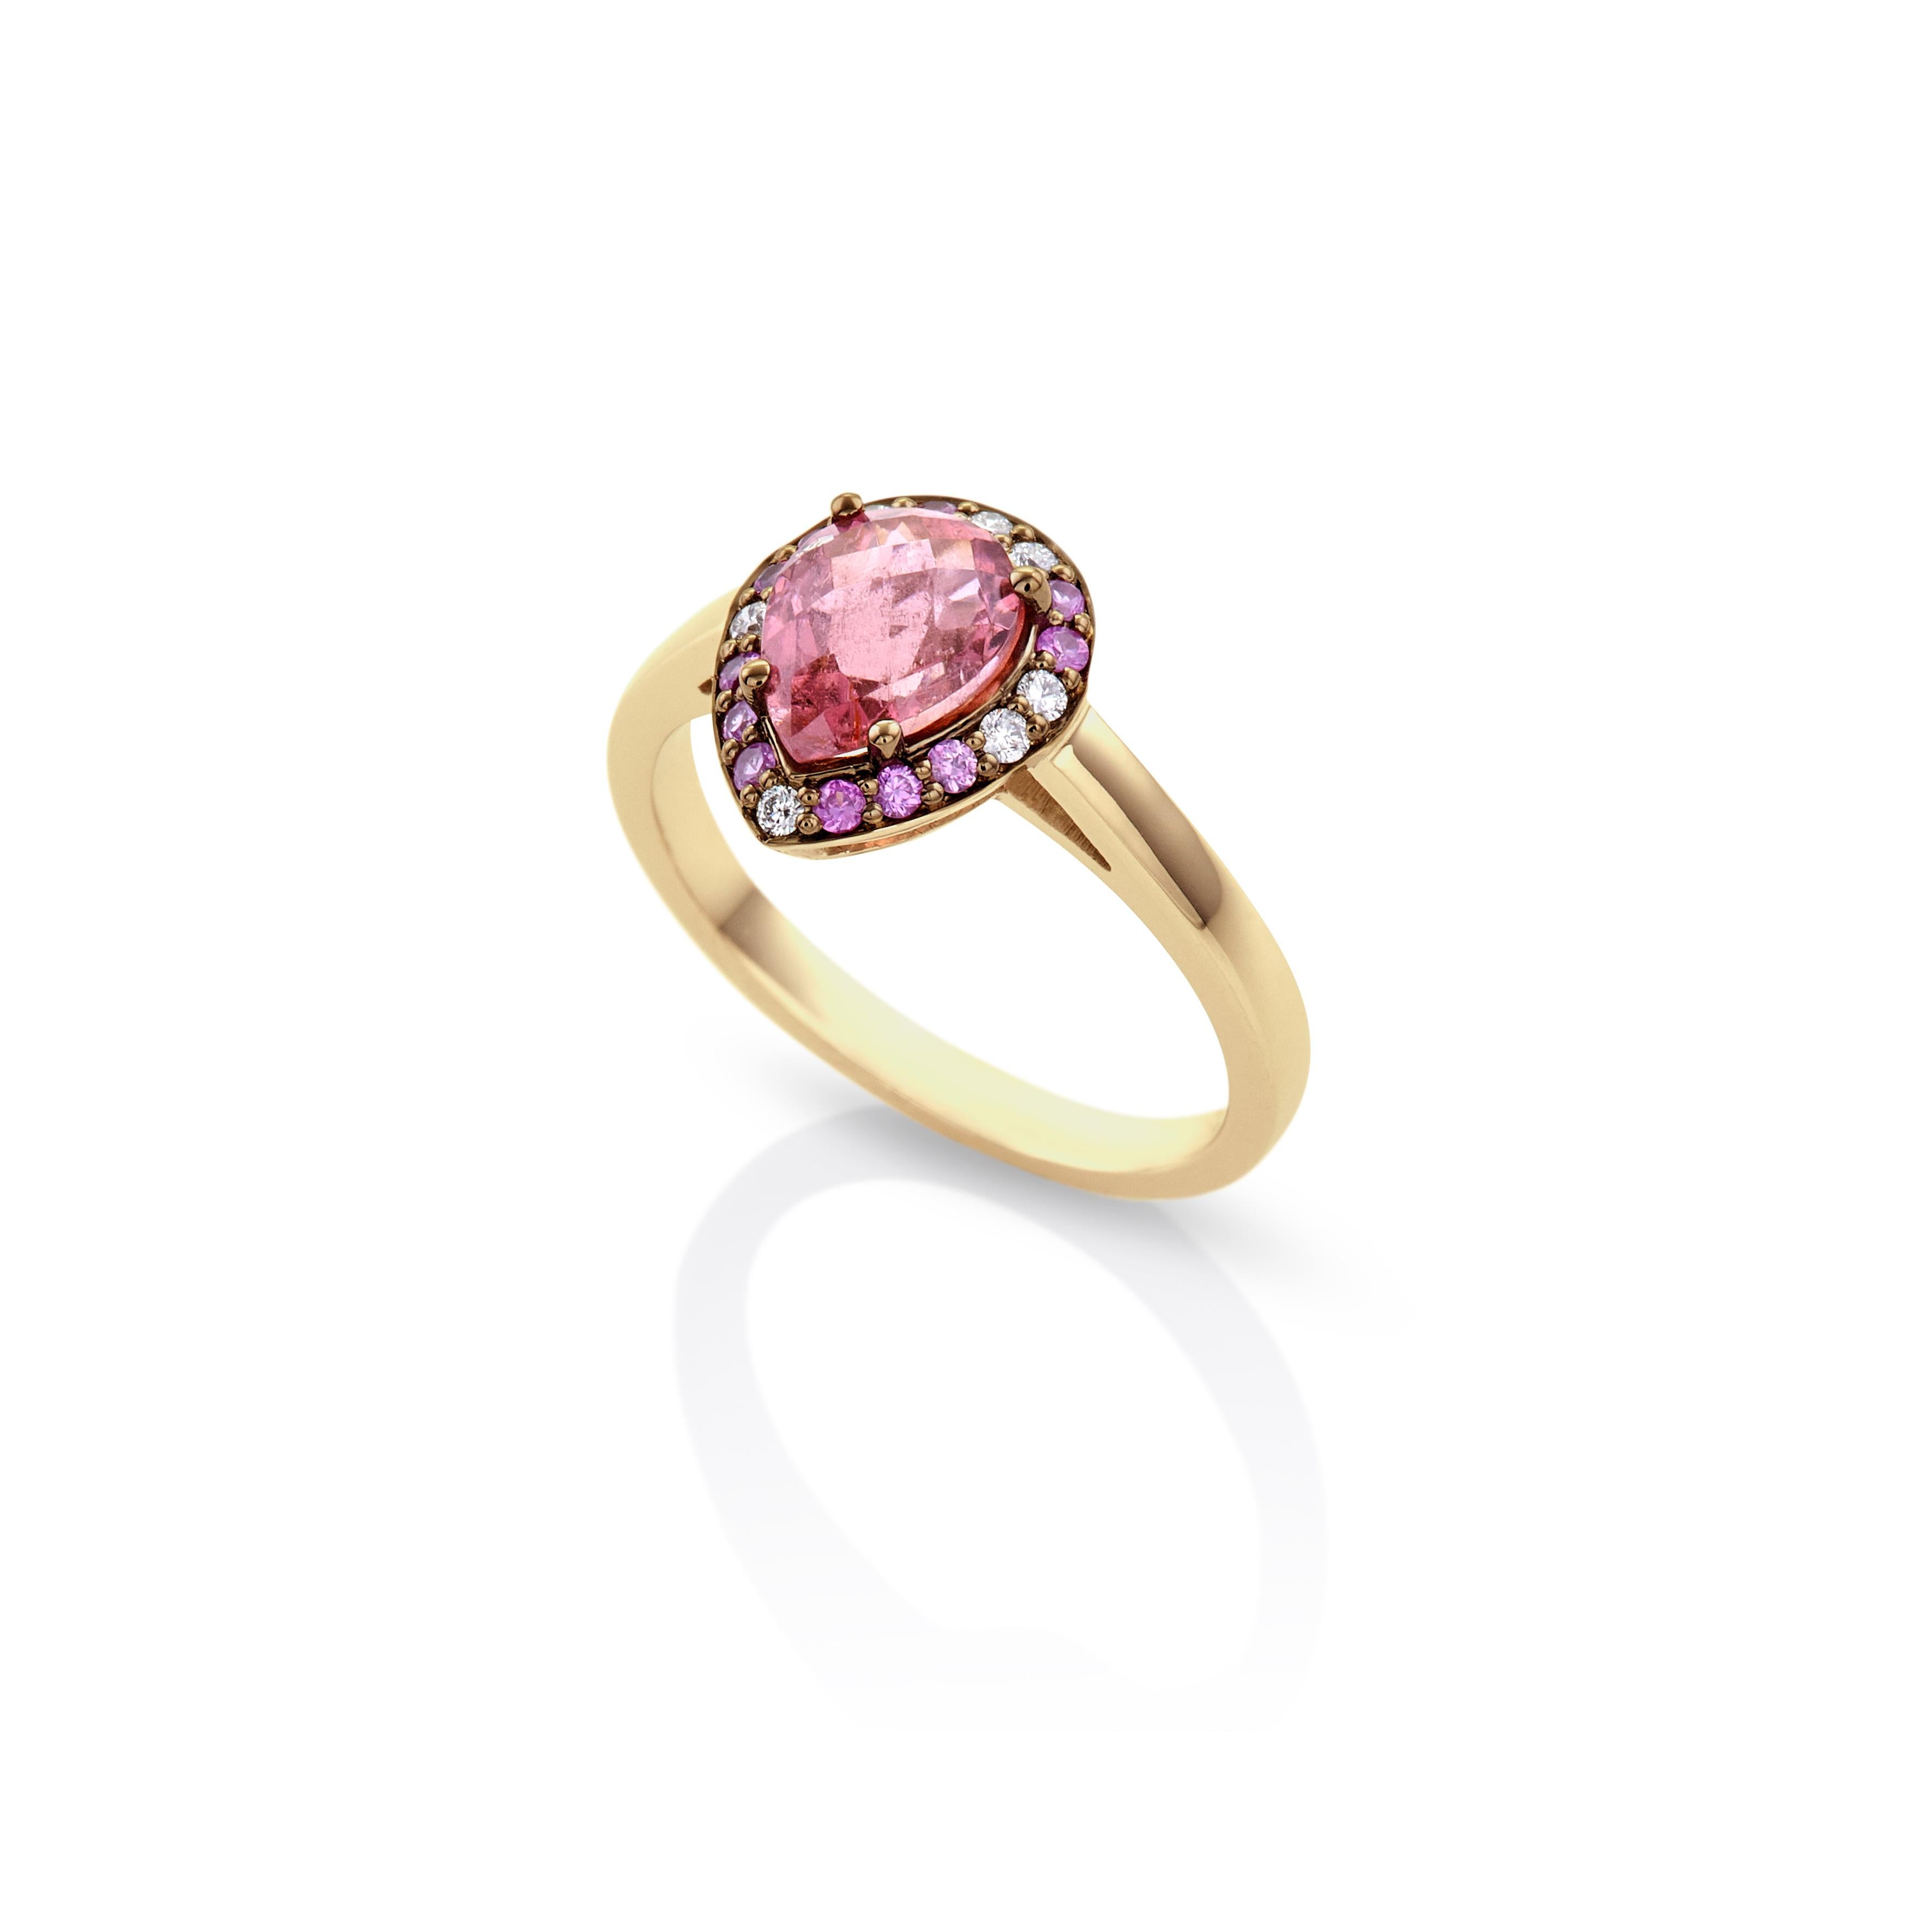 For Sale:  Colorful Drop Ring 18Kt White Gold with Red Tourmaline Pink Saphires and Diamond 6